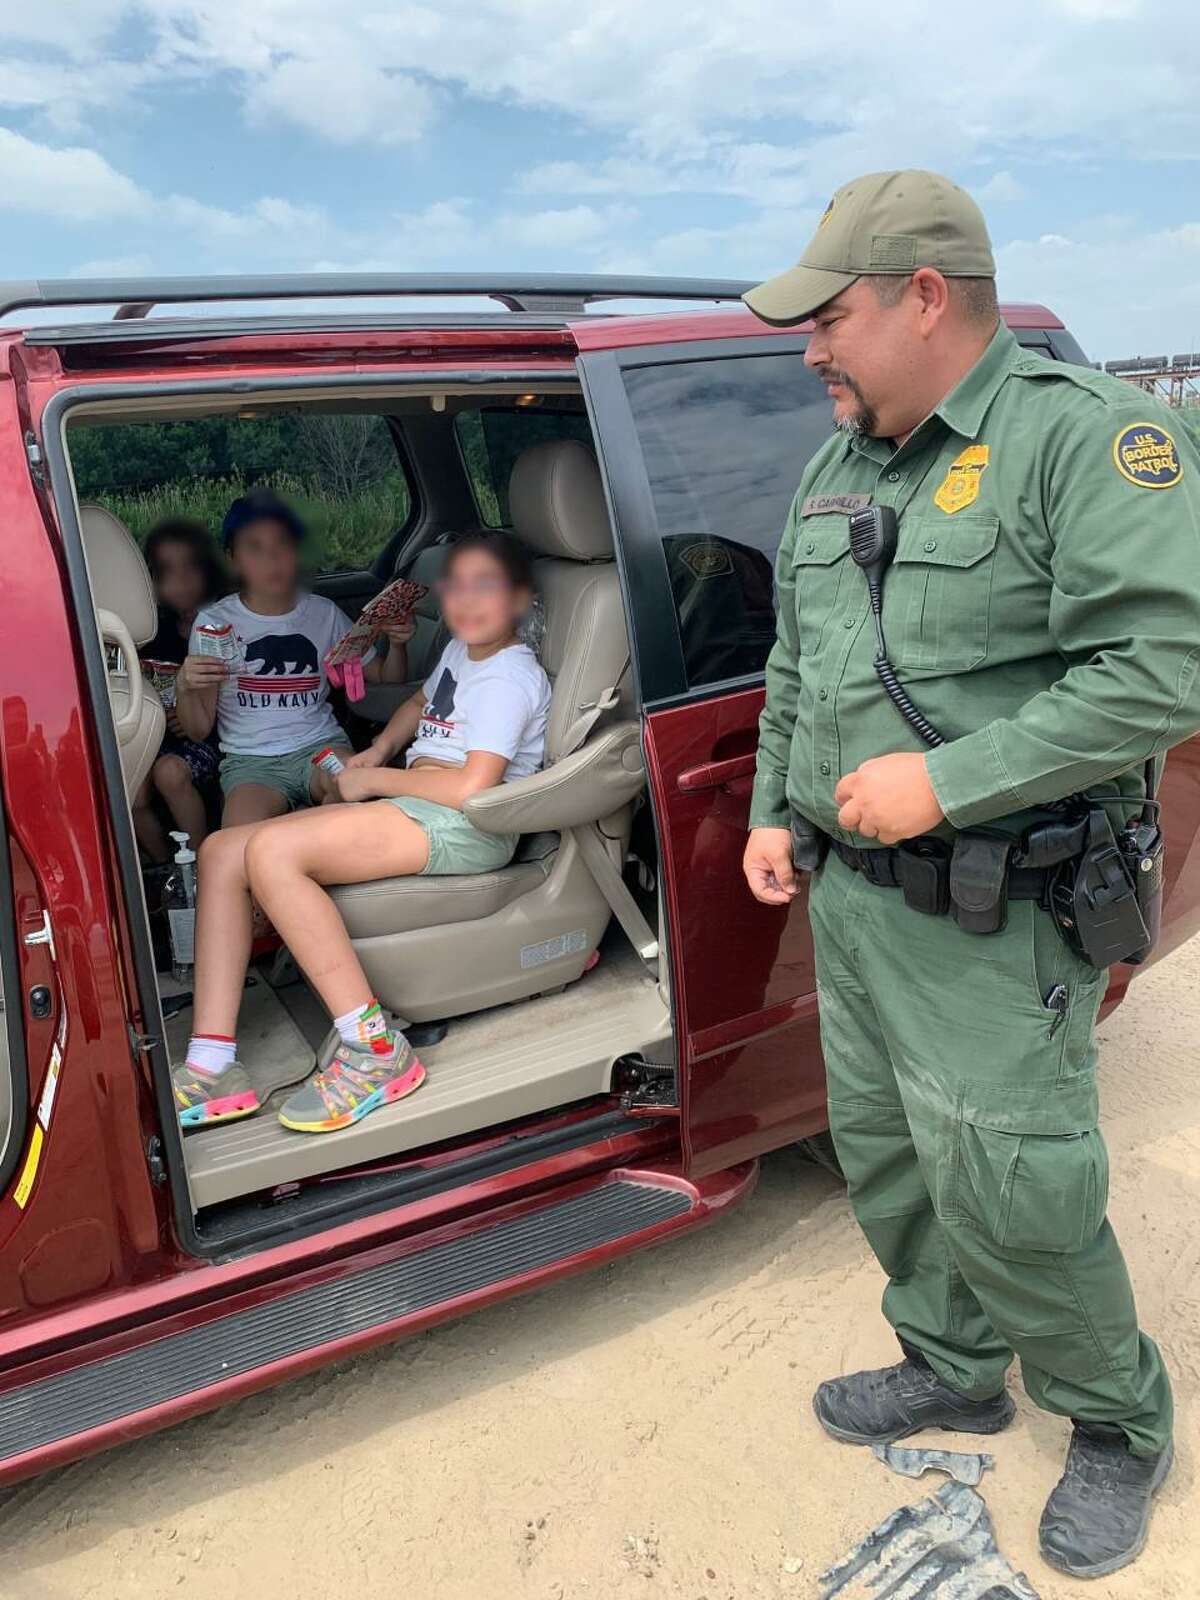 U.S.. Border Patrol Agent Ricardo Carrillo, a certified EMT, stands next to the children he rendered aid to. Carrillo provided medical attention to one girl who was suffering from severe heat exhaustion.